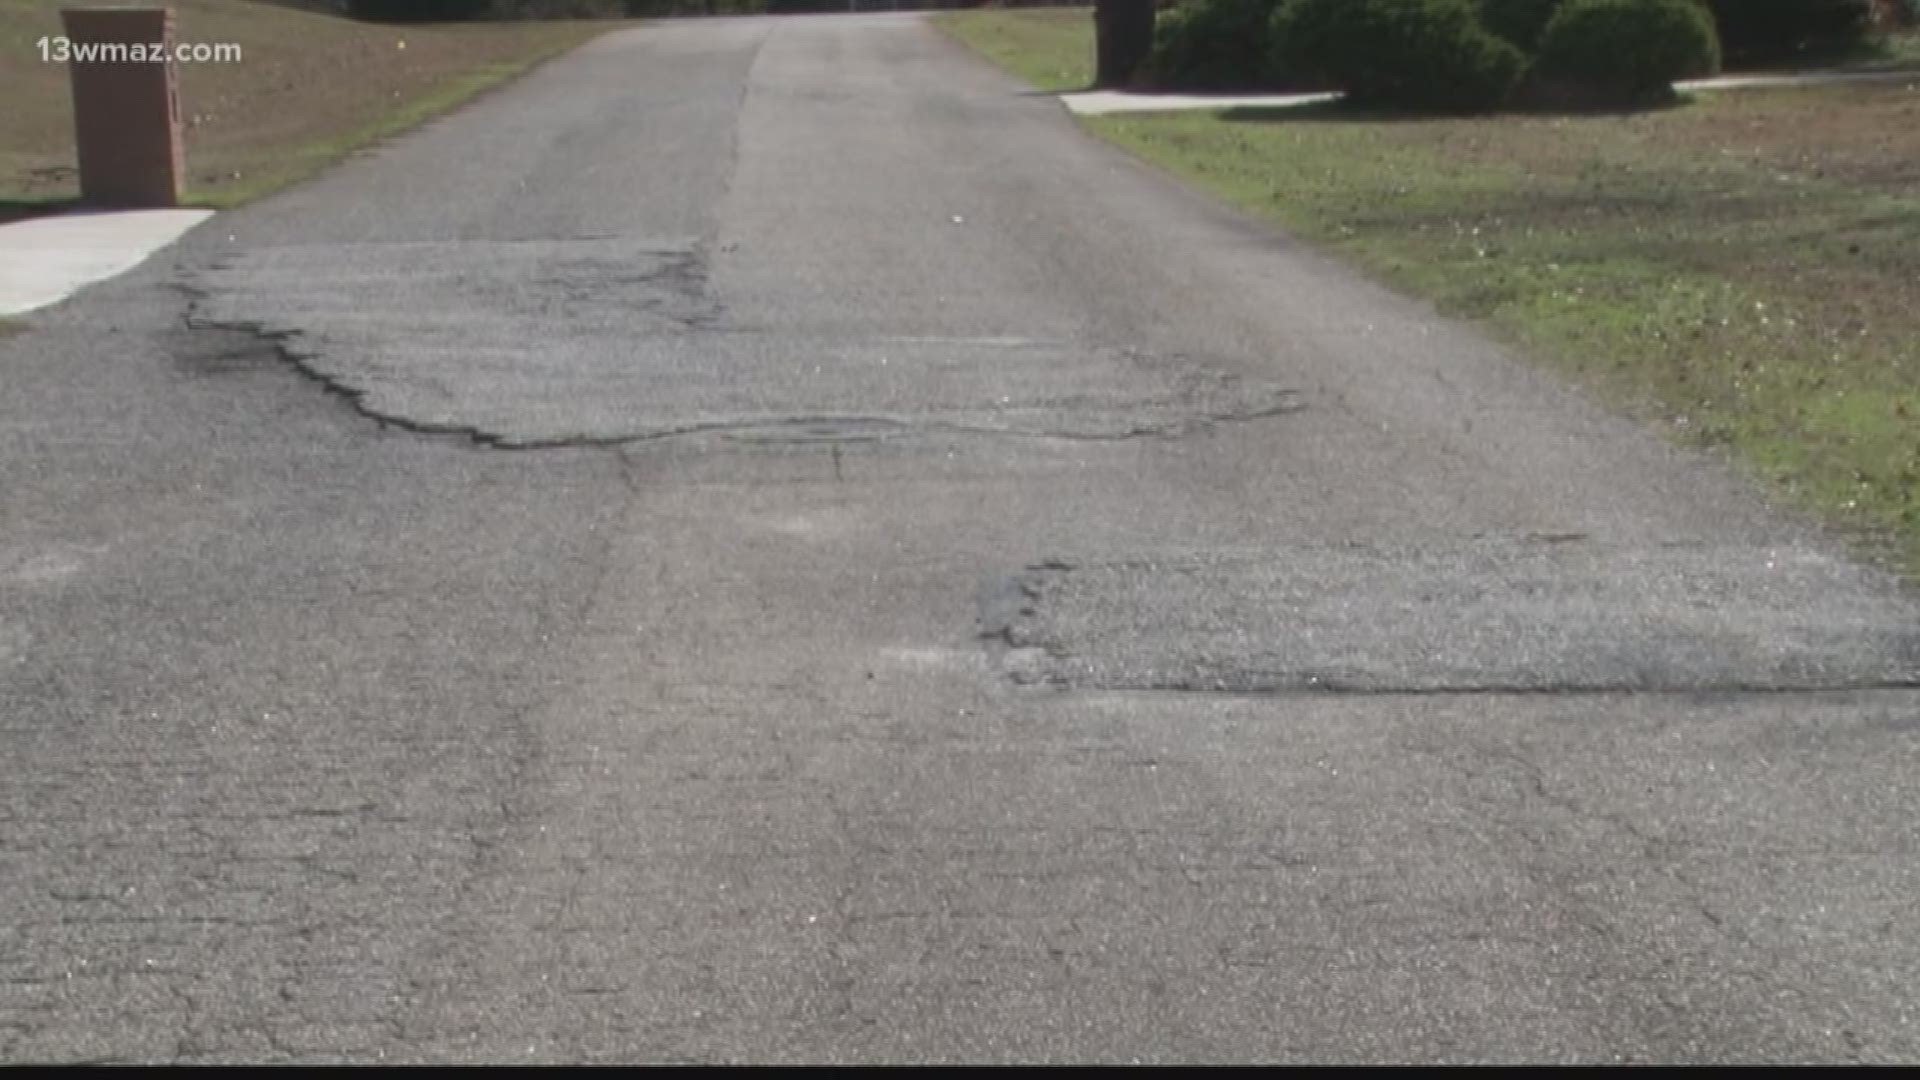 One Lizella man says potholes and patch over work on Waterwheel Court are making the road uneven, and it's driving neighbors crazy!